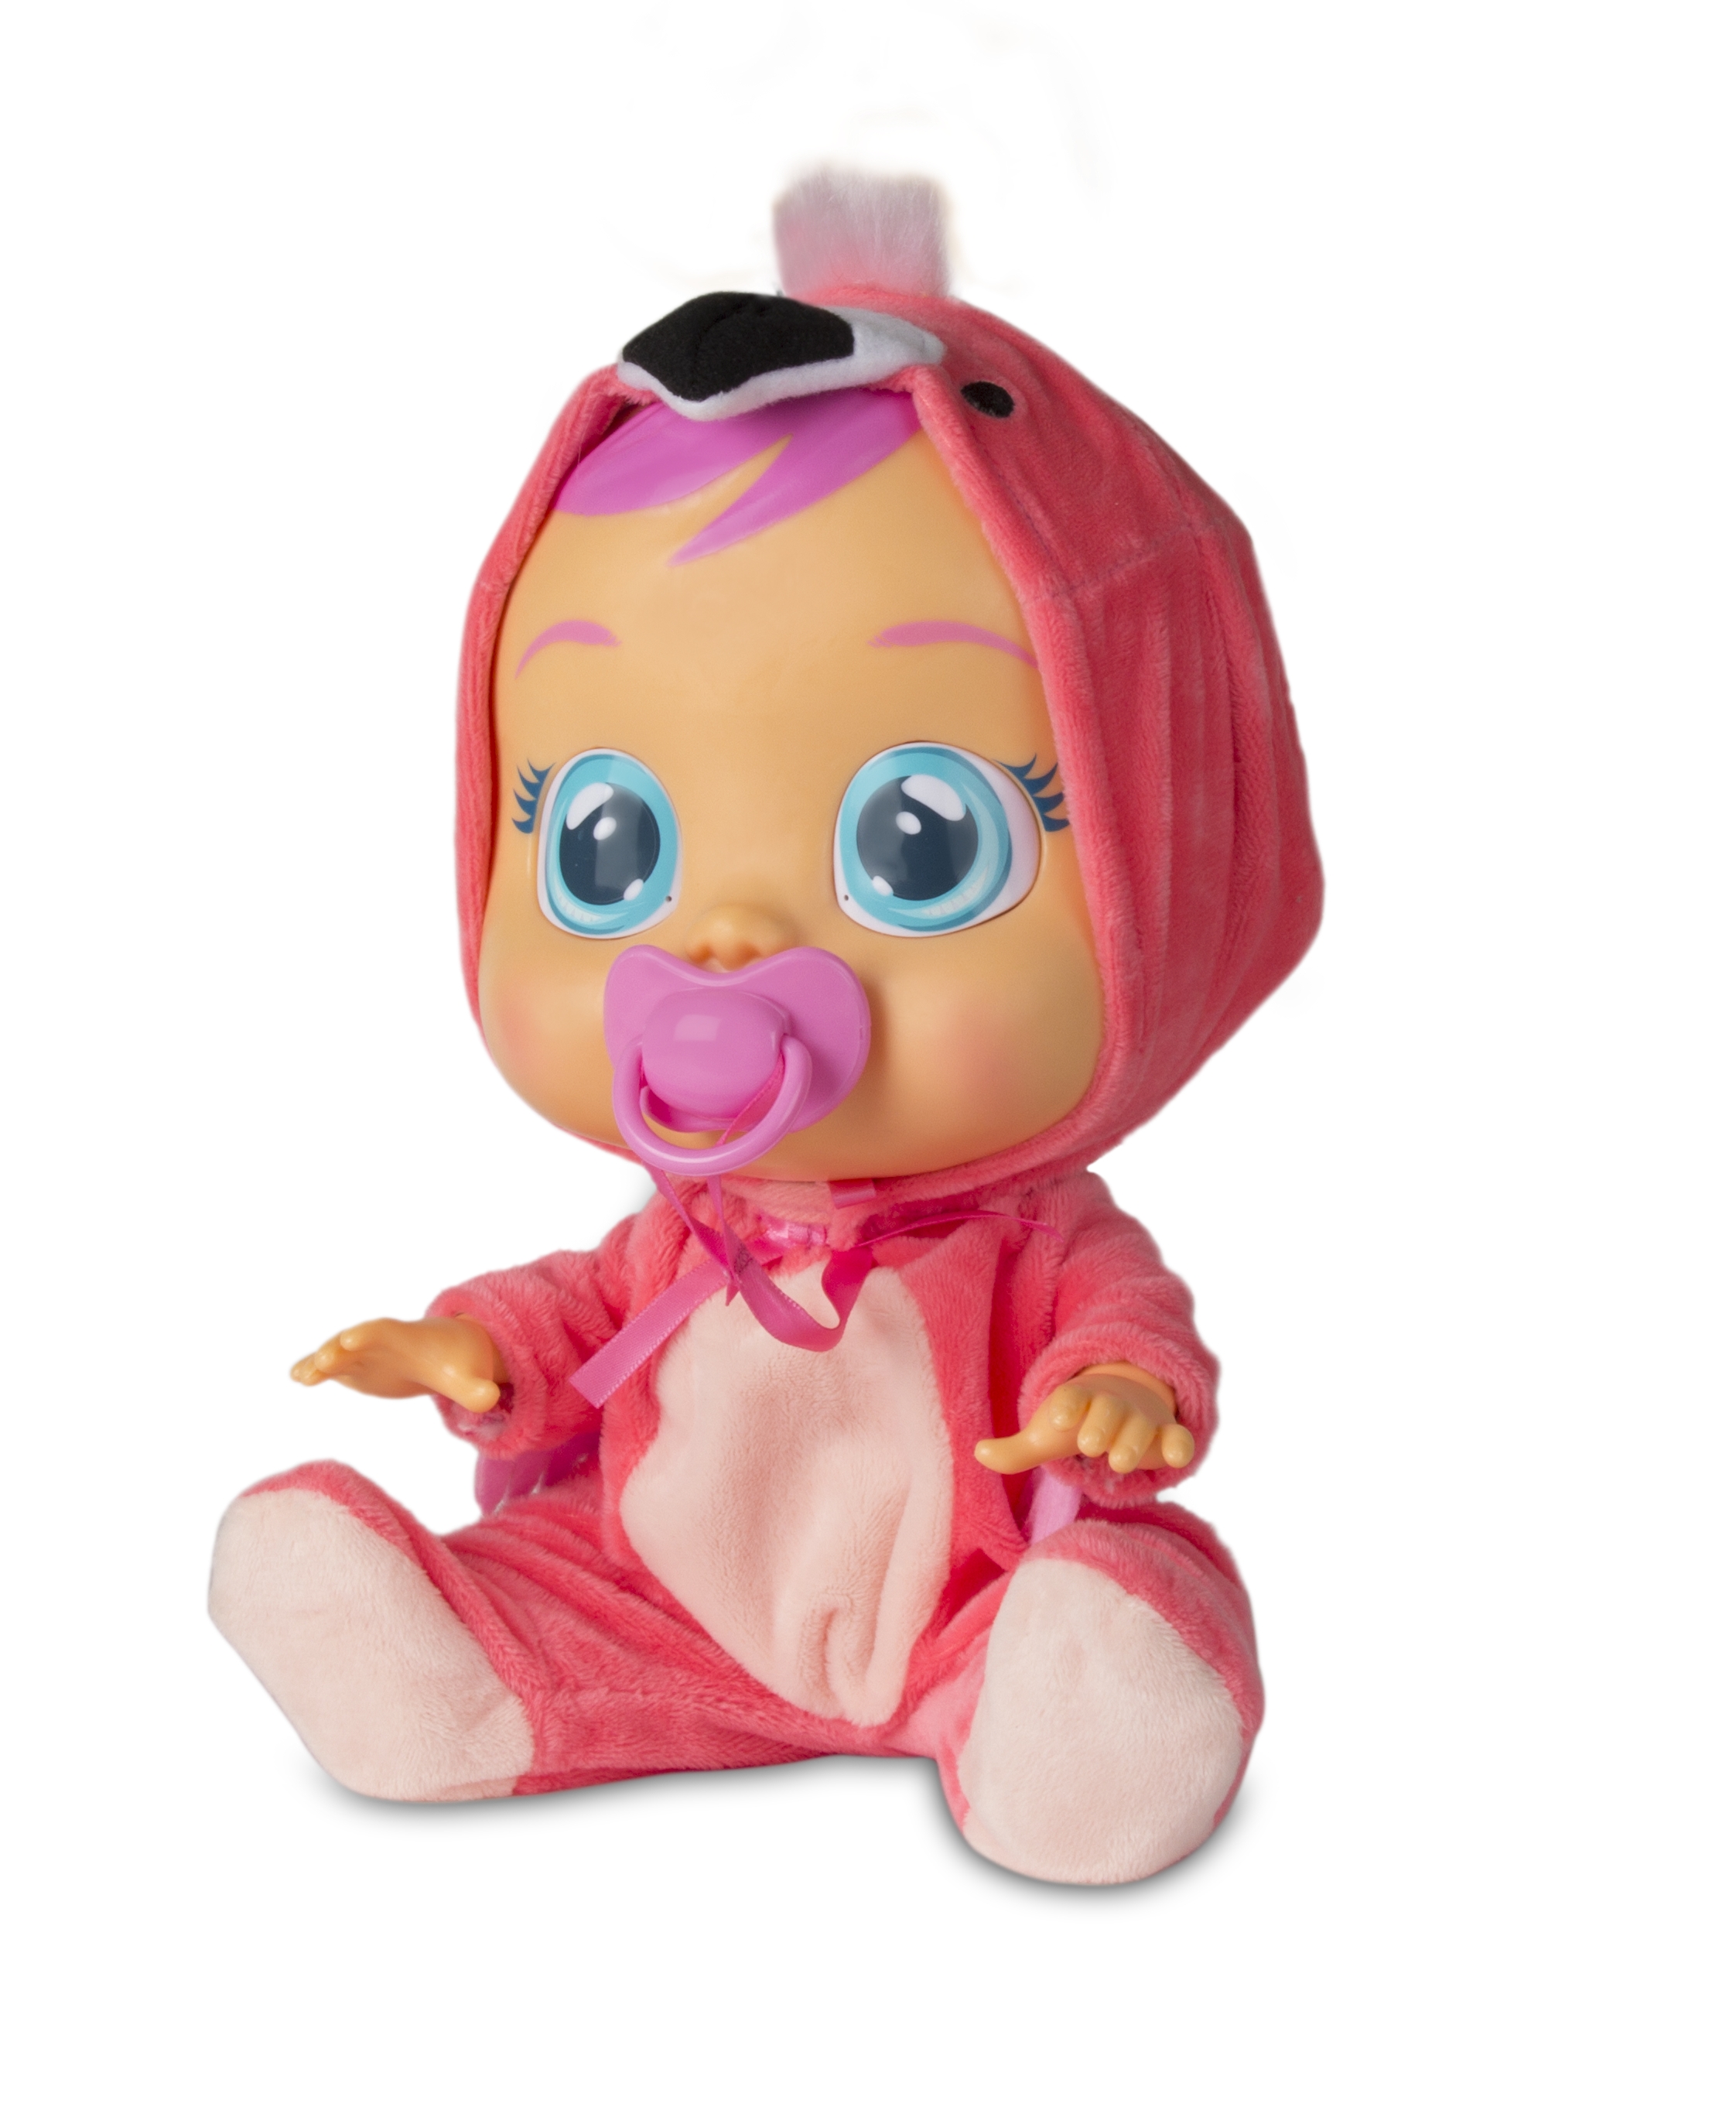 Cry Babies Fancy Doll - image 4 of 6